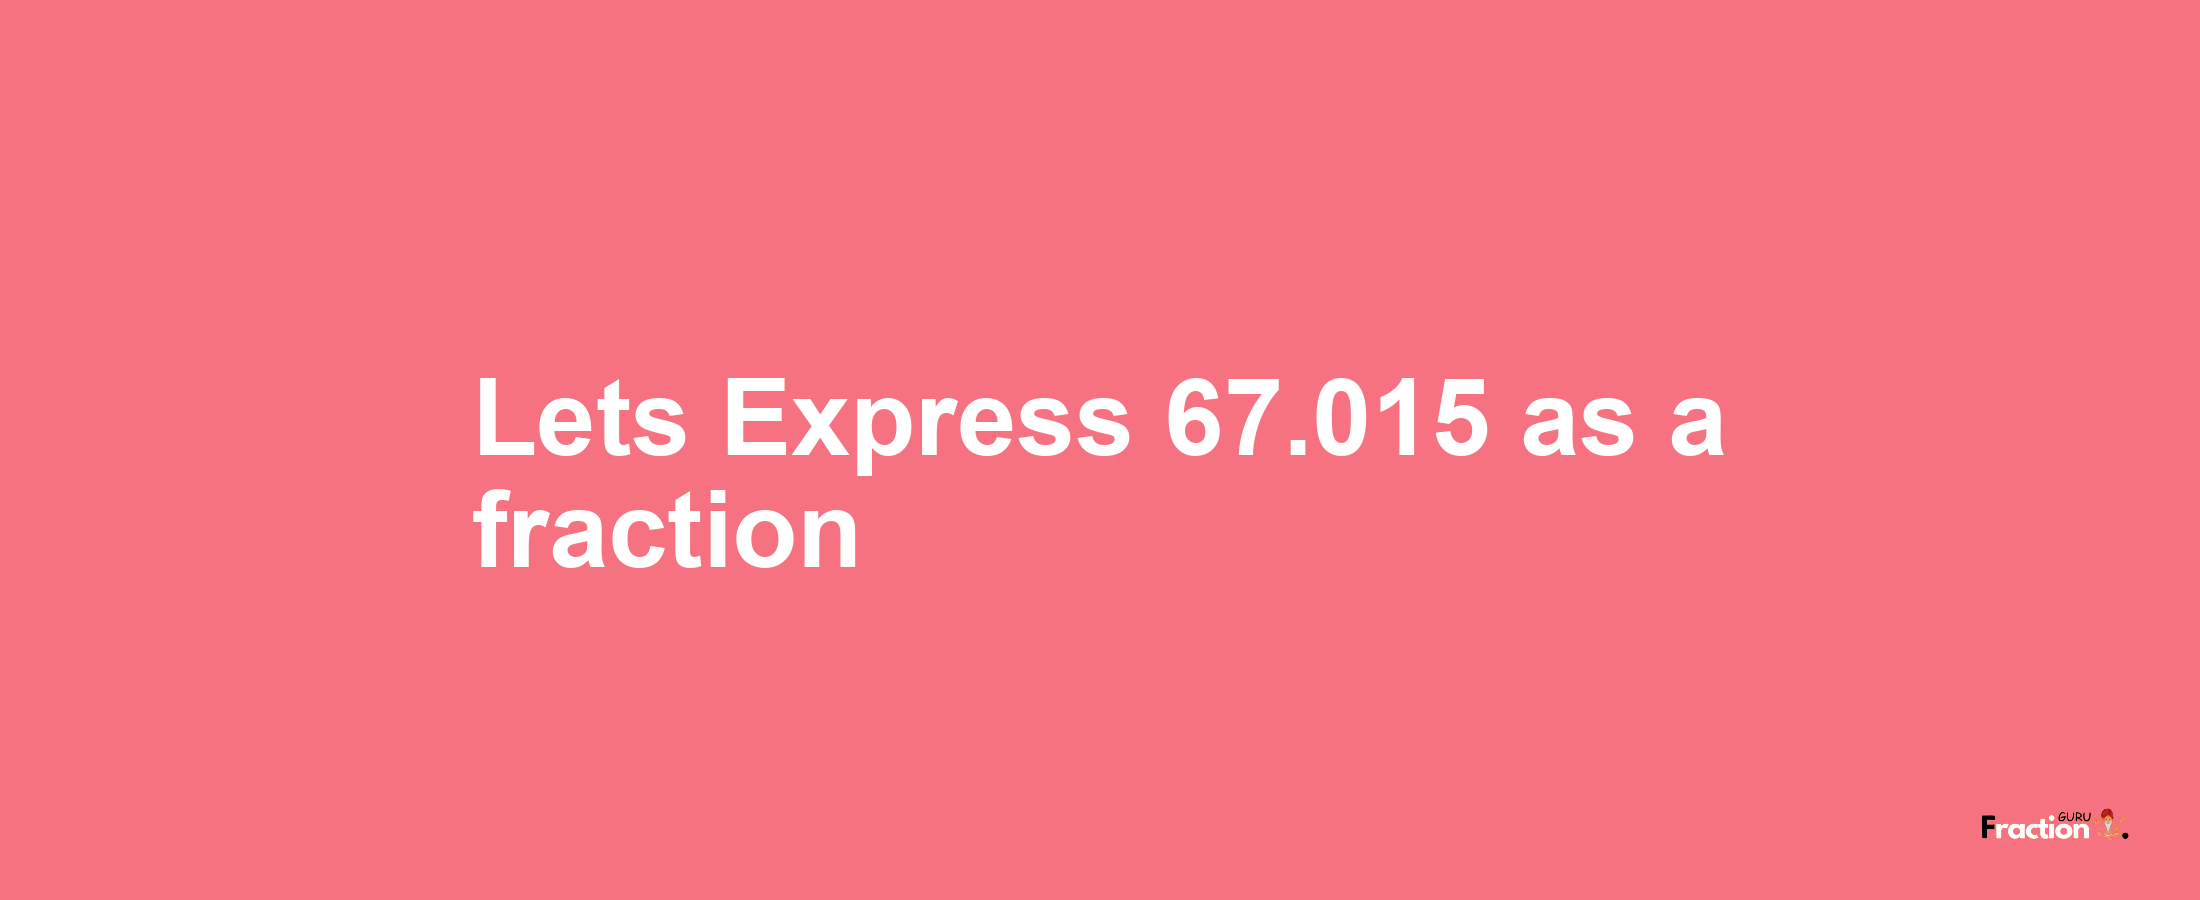 Lets Express 67.015 as afraction